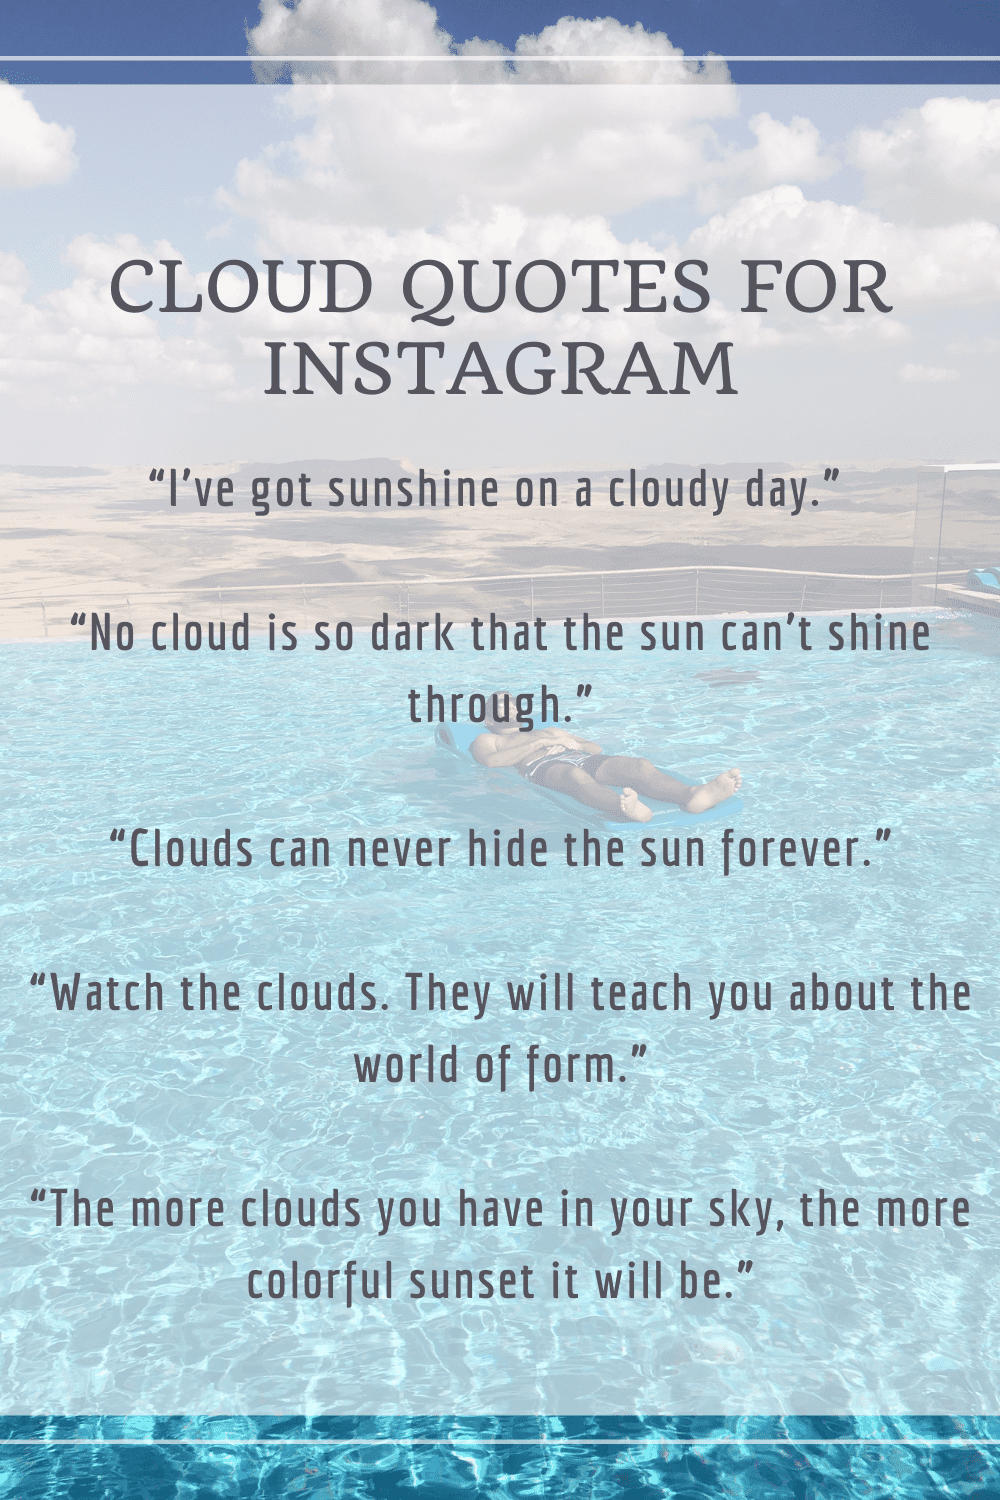 Cloud Quotes for Instagram